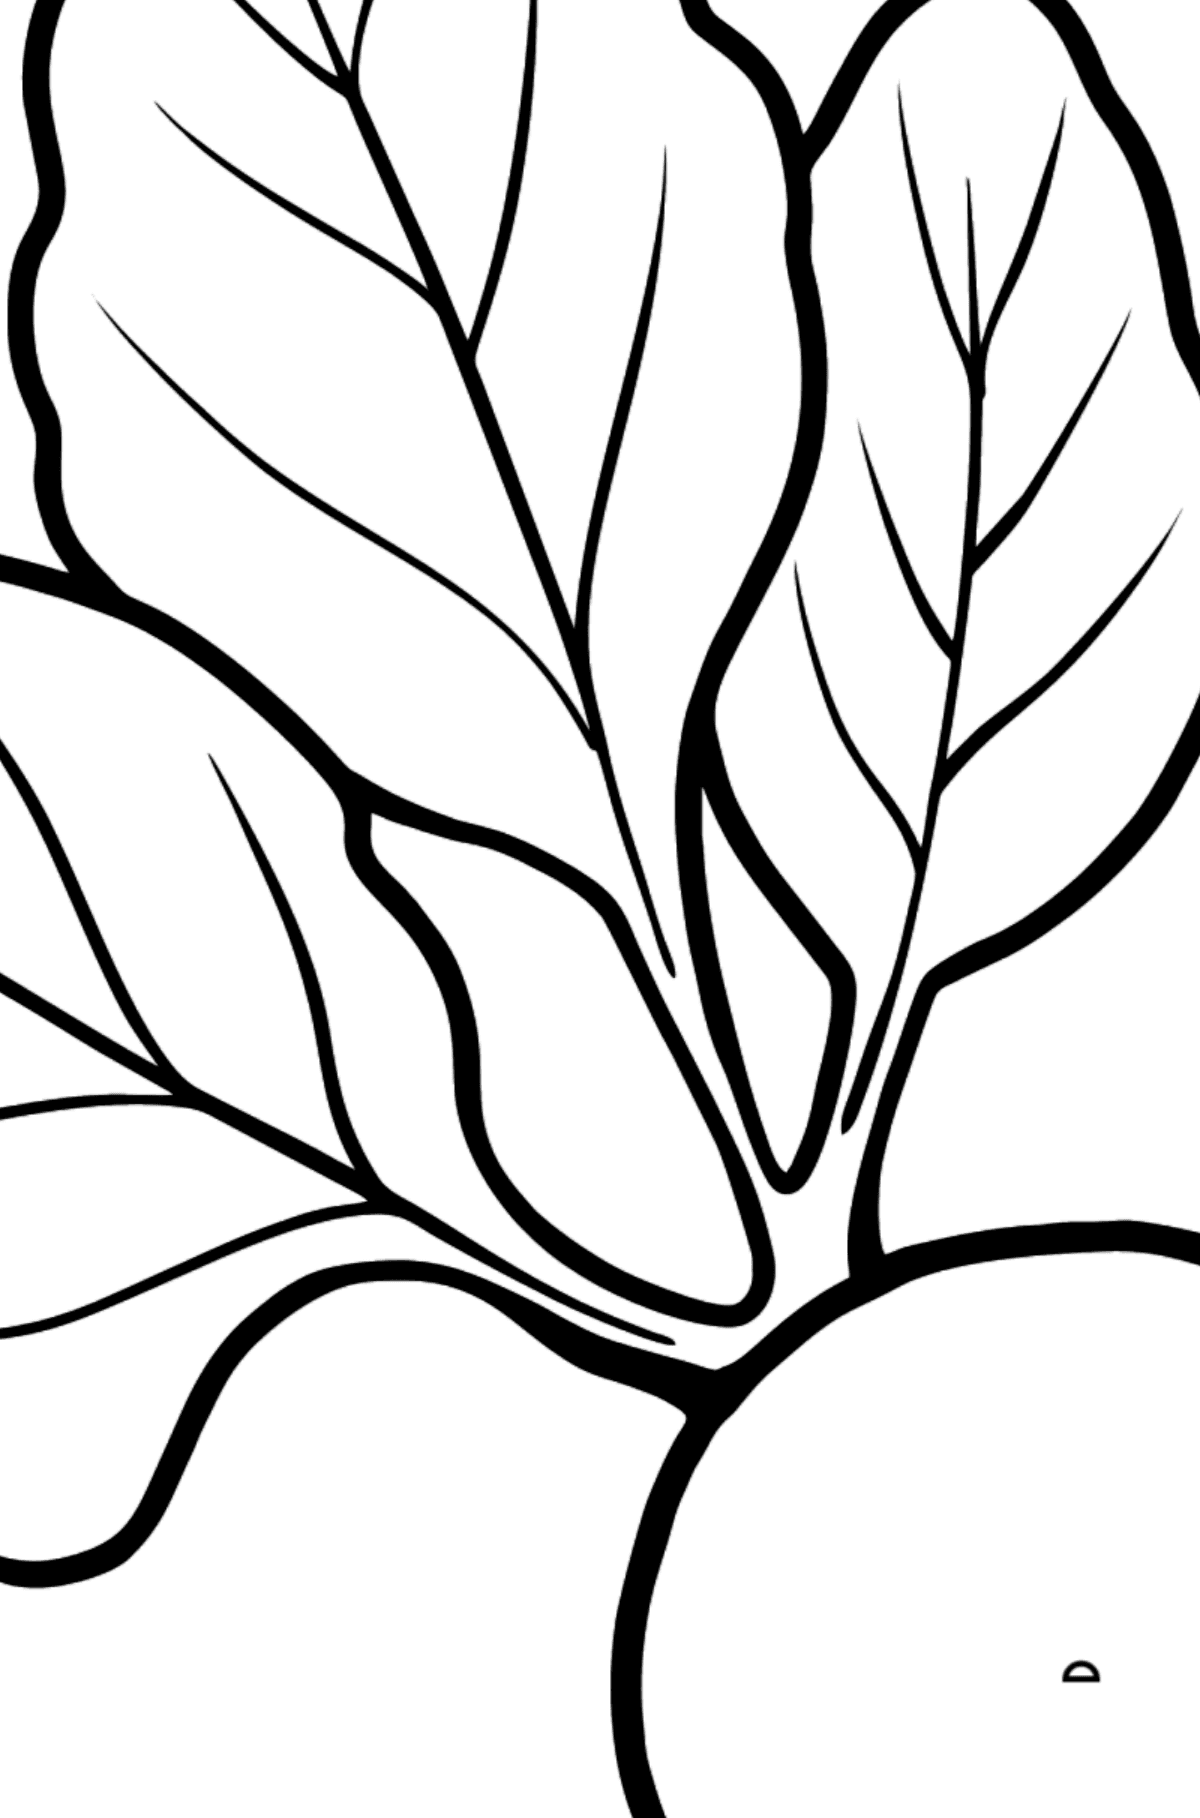 Beet coloring page - Coloring by Geometric Shapes for Kids